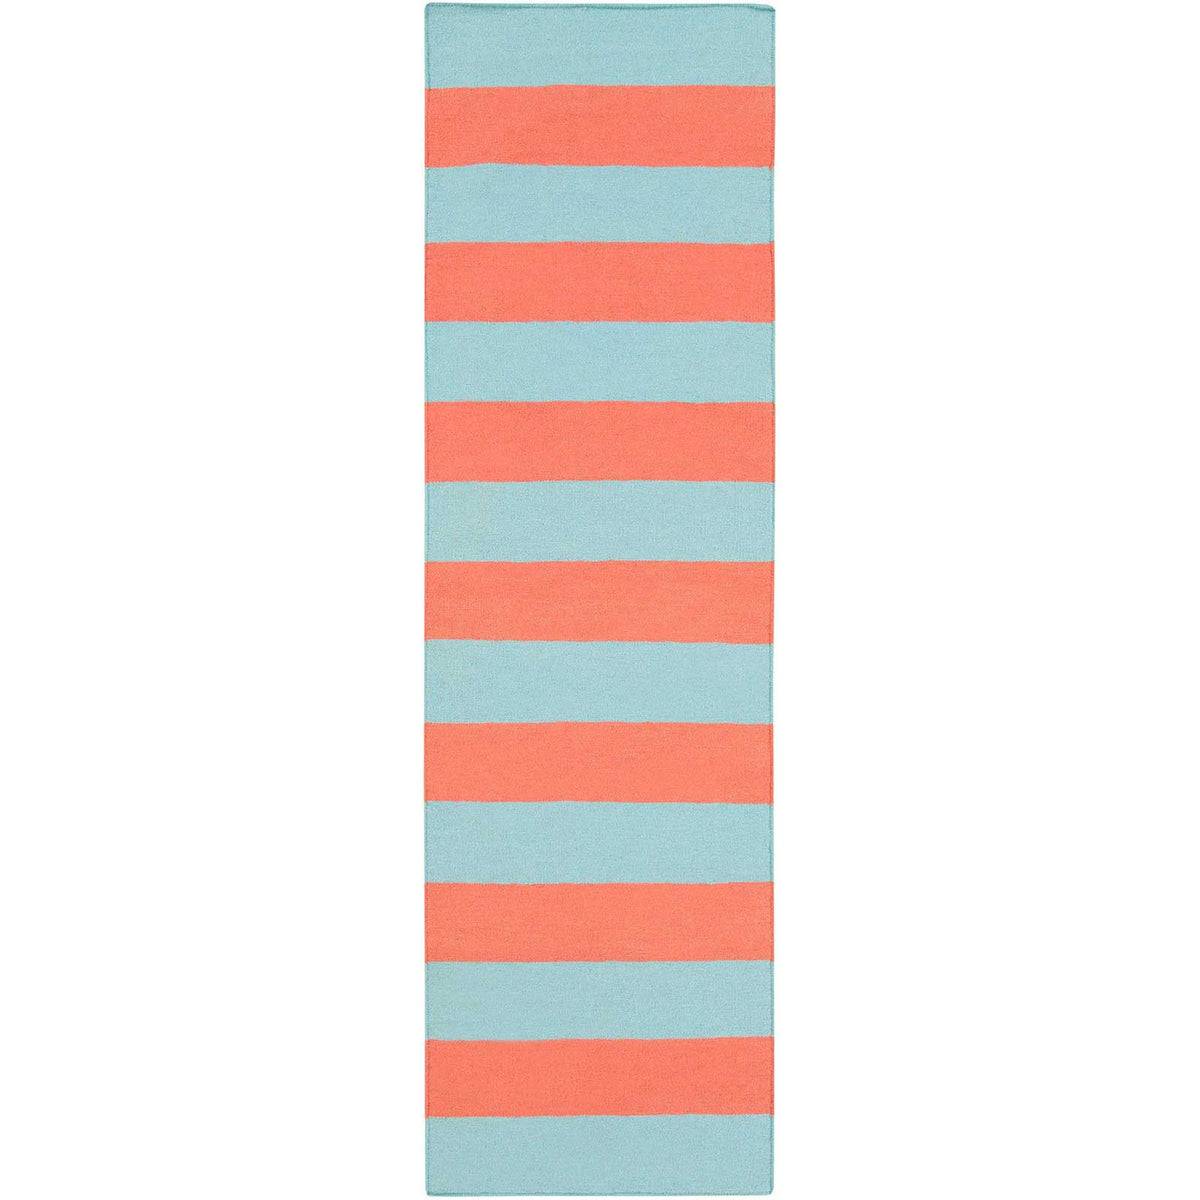 Frontier Striped Coral/Aqua Runner Rug